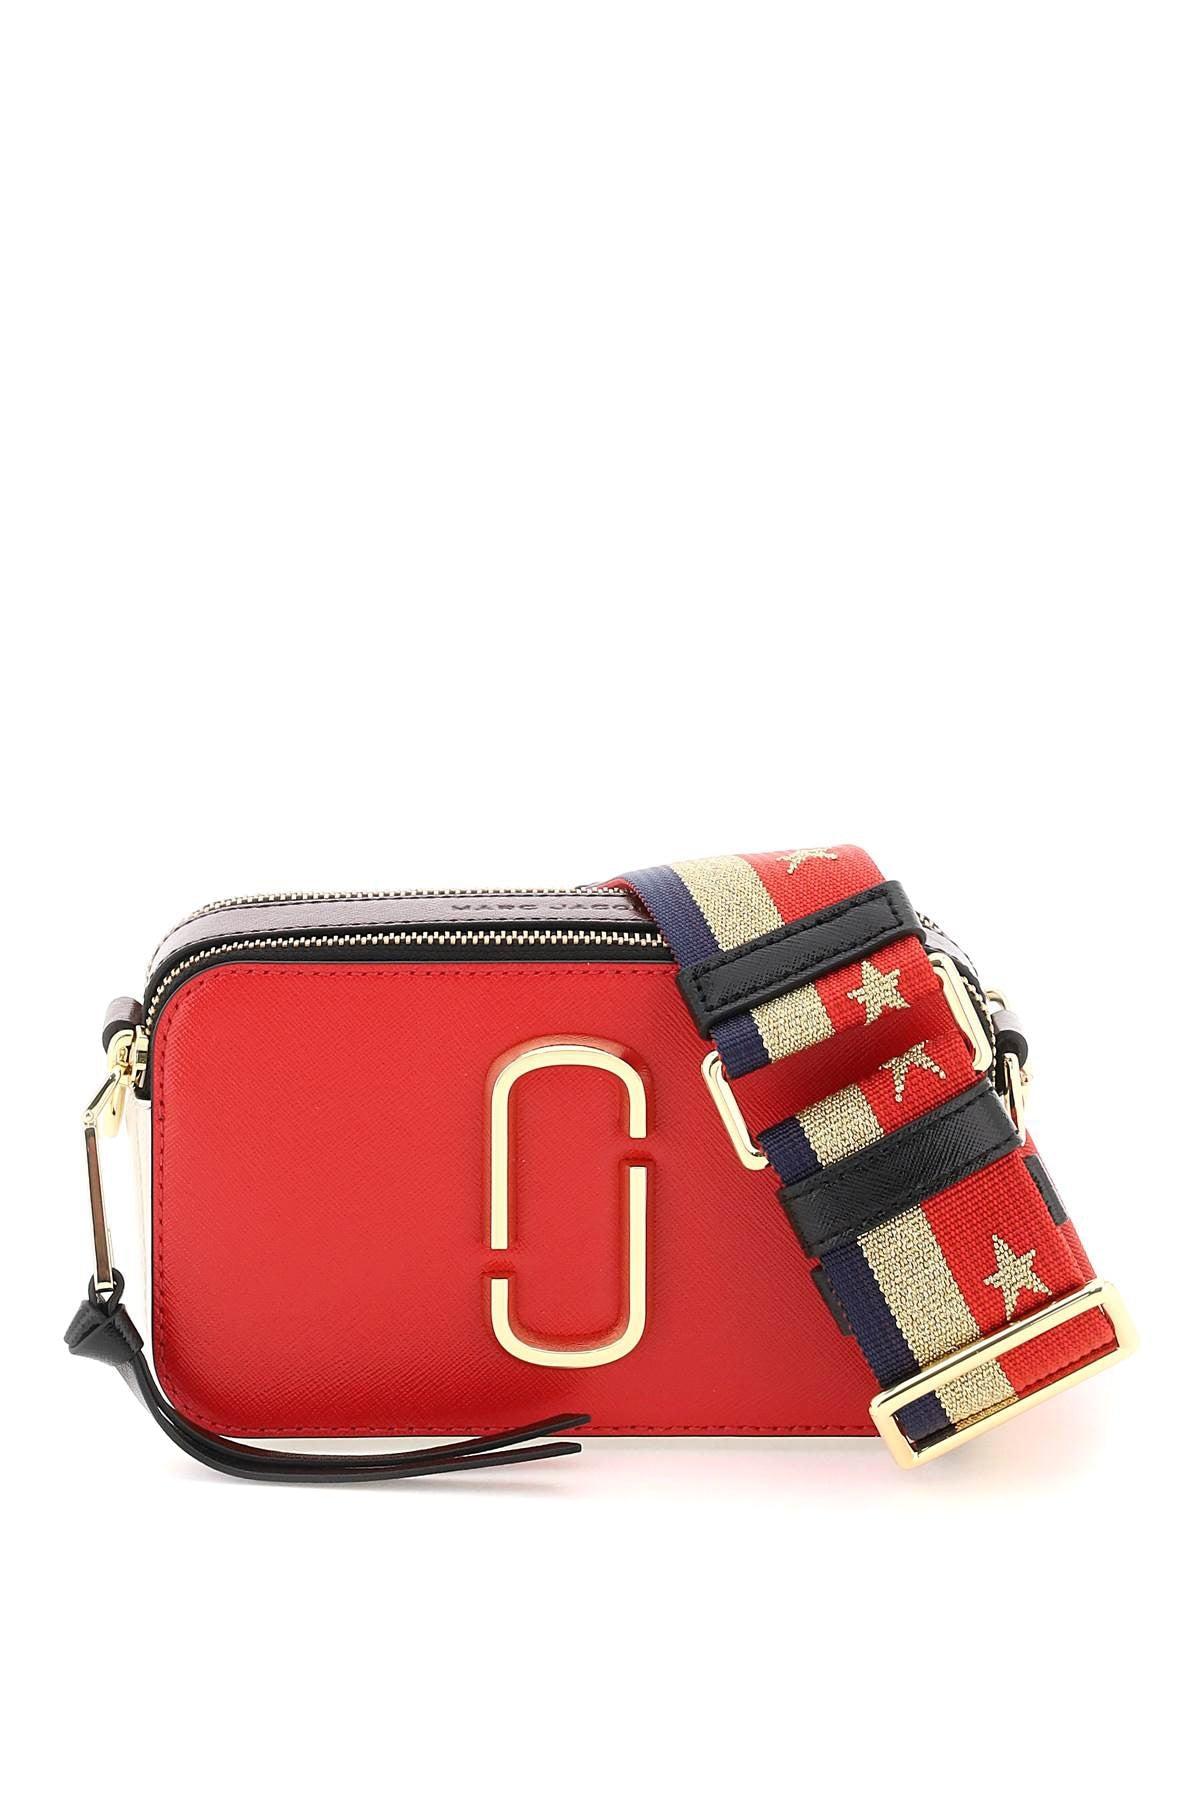 marc jacobs snapshot bag white and red